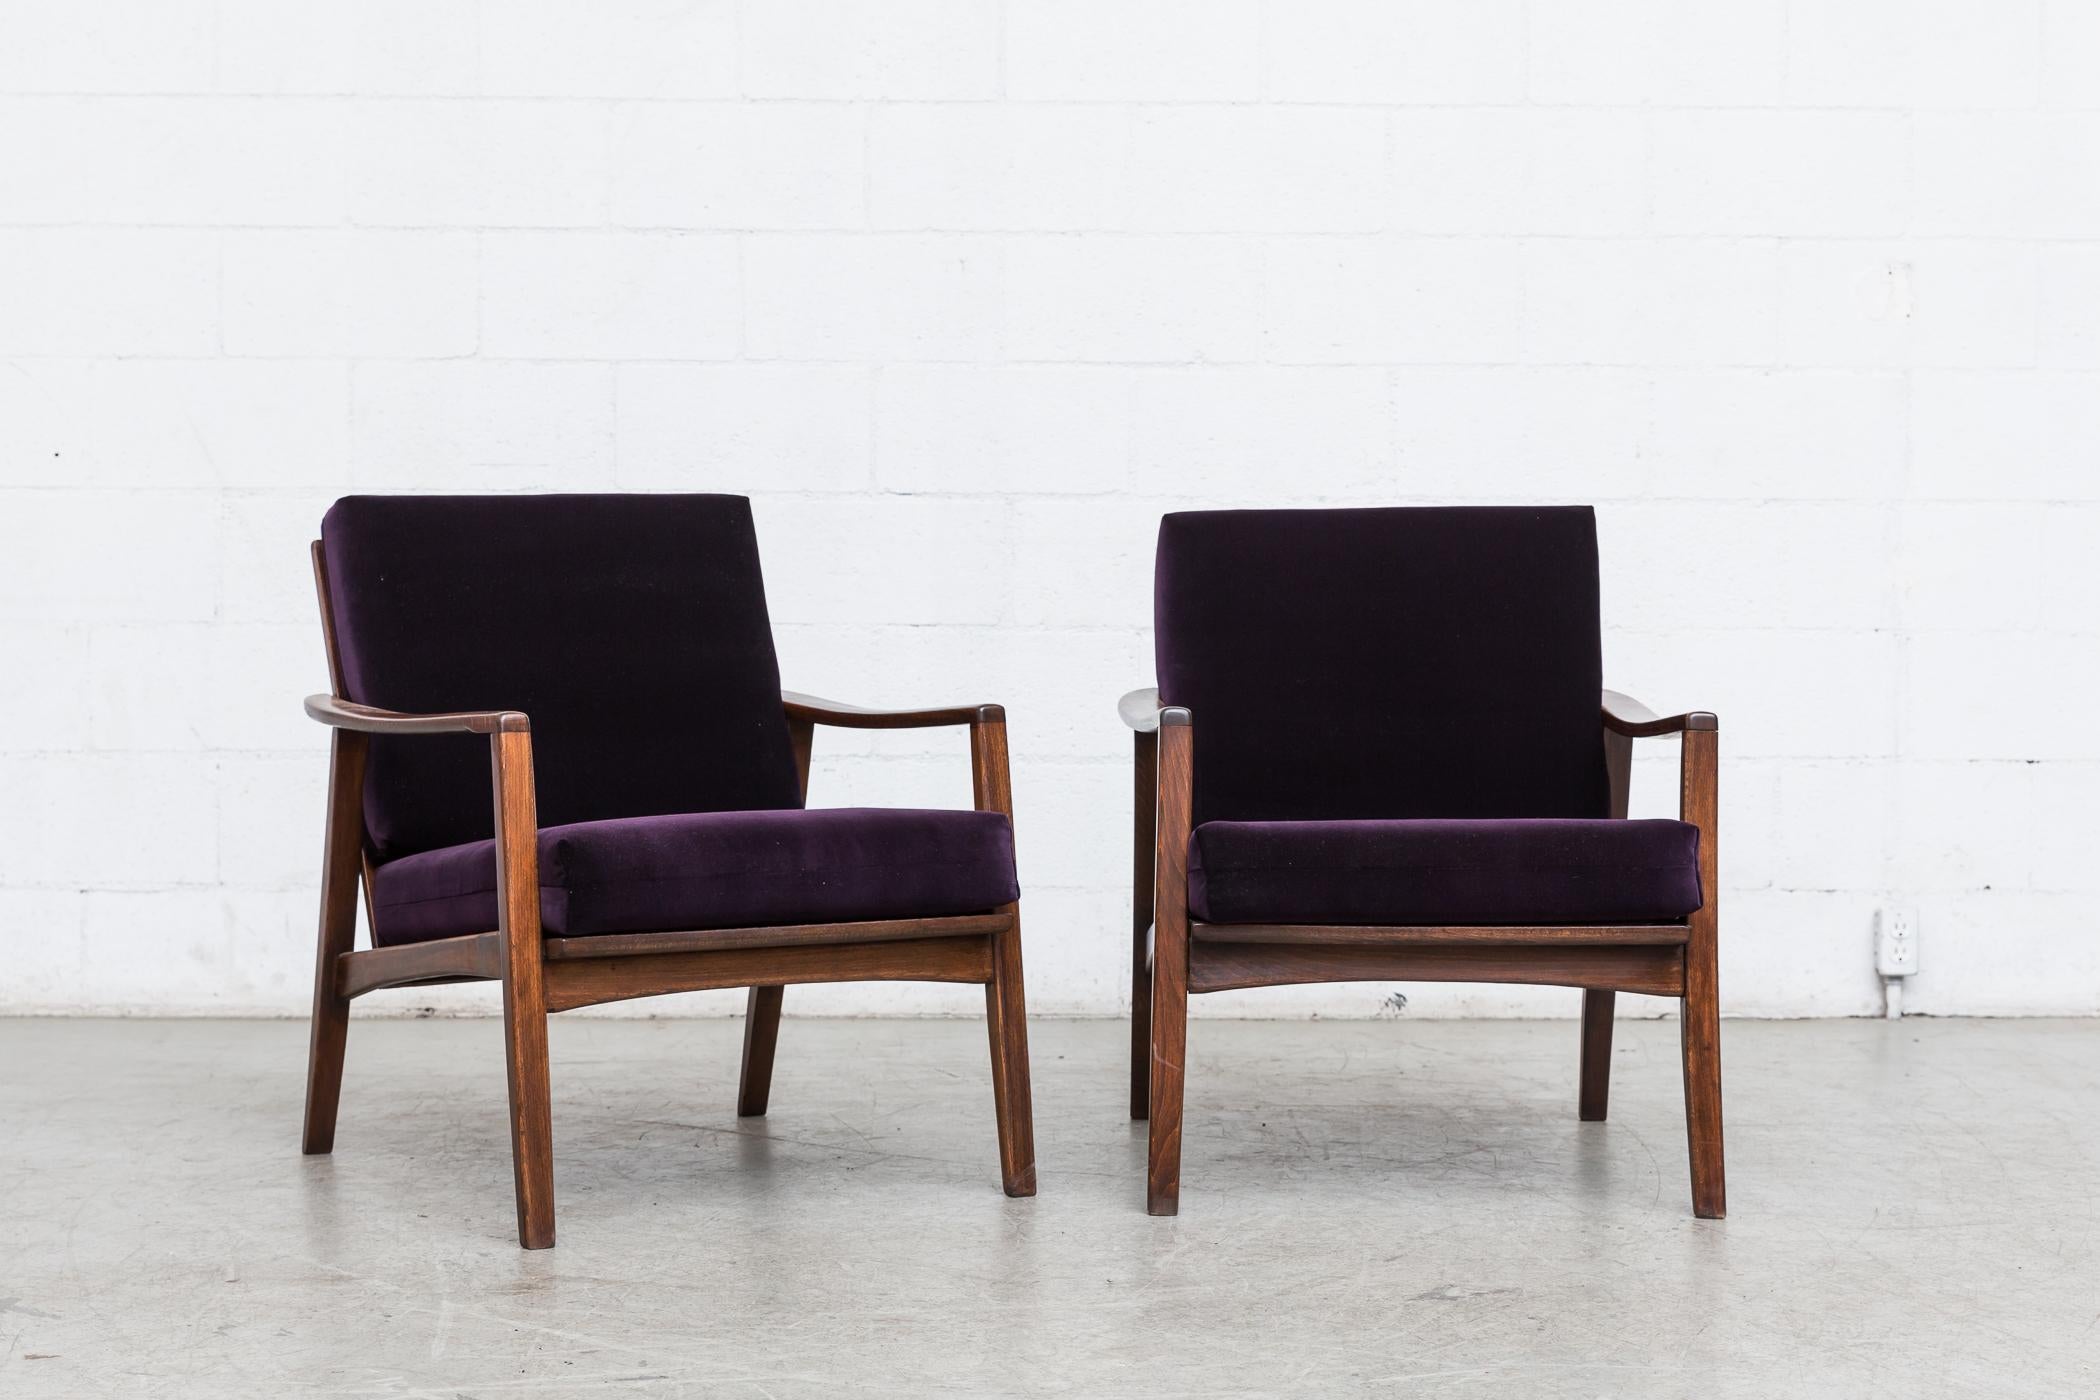 Pair of midcentury lounge chairs with rich dark wood frames and bow tie shaped back slat supports. Newly upholstered amethyst velvet cushions. Frames in original condition. Set price.